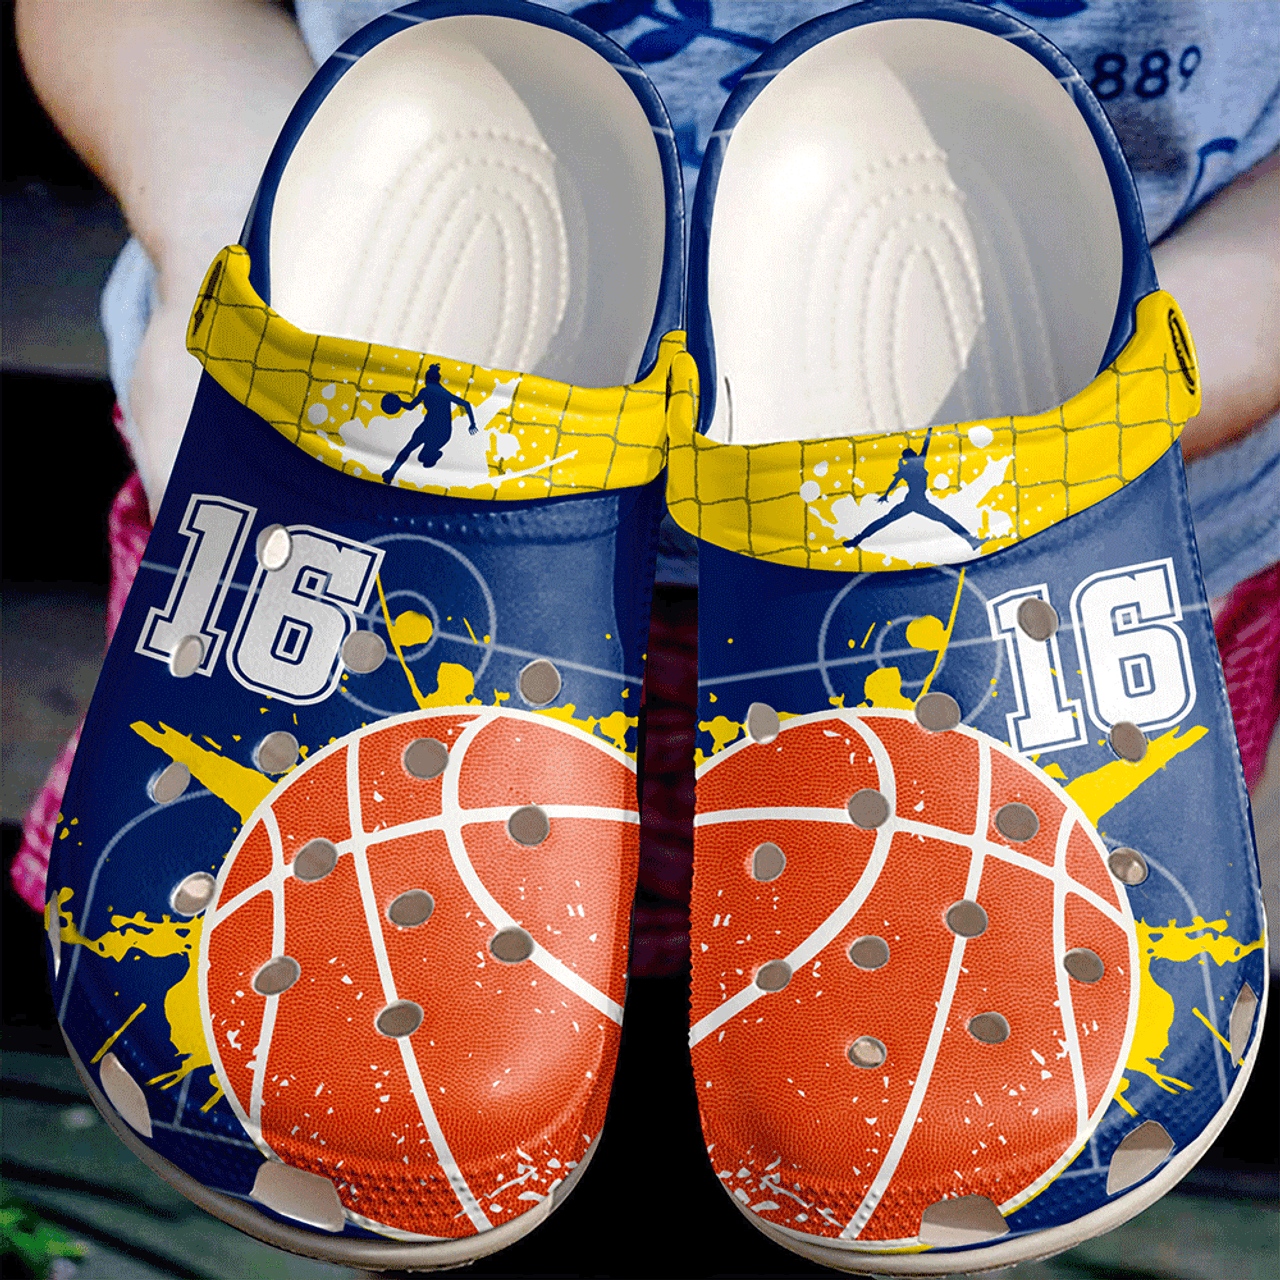 Personalized Basketball Passion Crocs Crocband Clogs, Gift For Lover Basketball Crocs Comfy Footwear